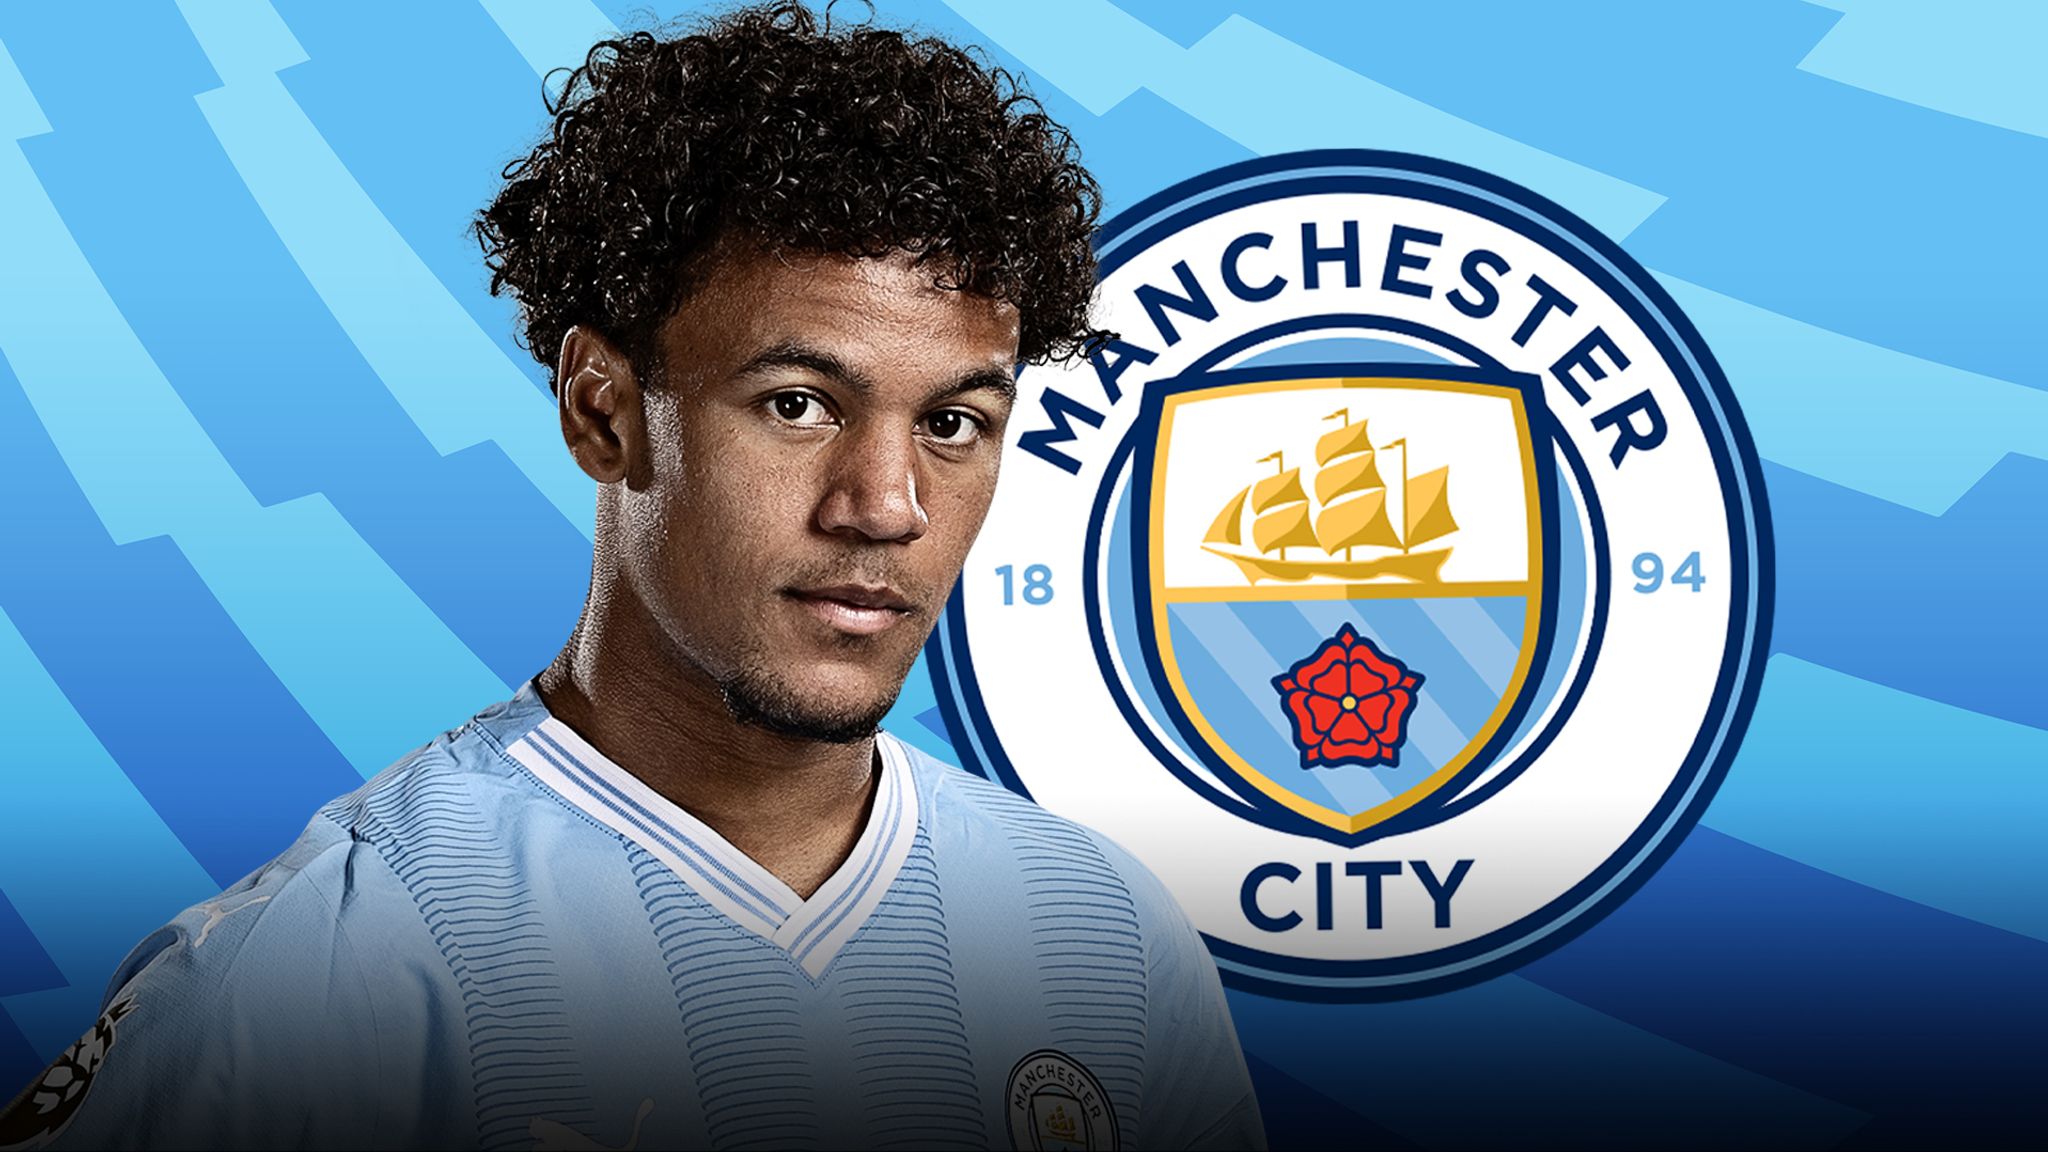 Oscar Bobb's Man City rise: From Norway to Manchester, the making of Pep Guardiola's precocious new superstar | Football News | Sky Sports